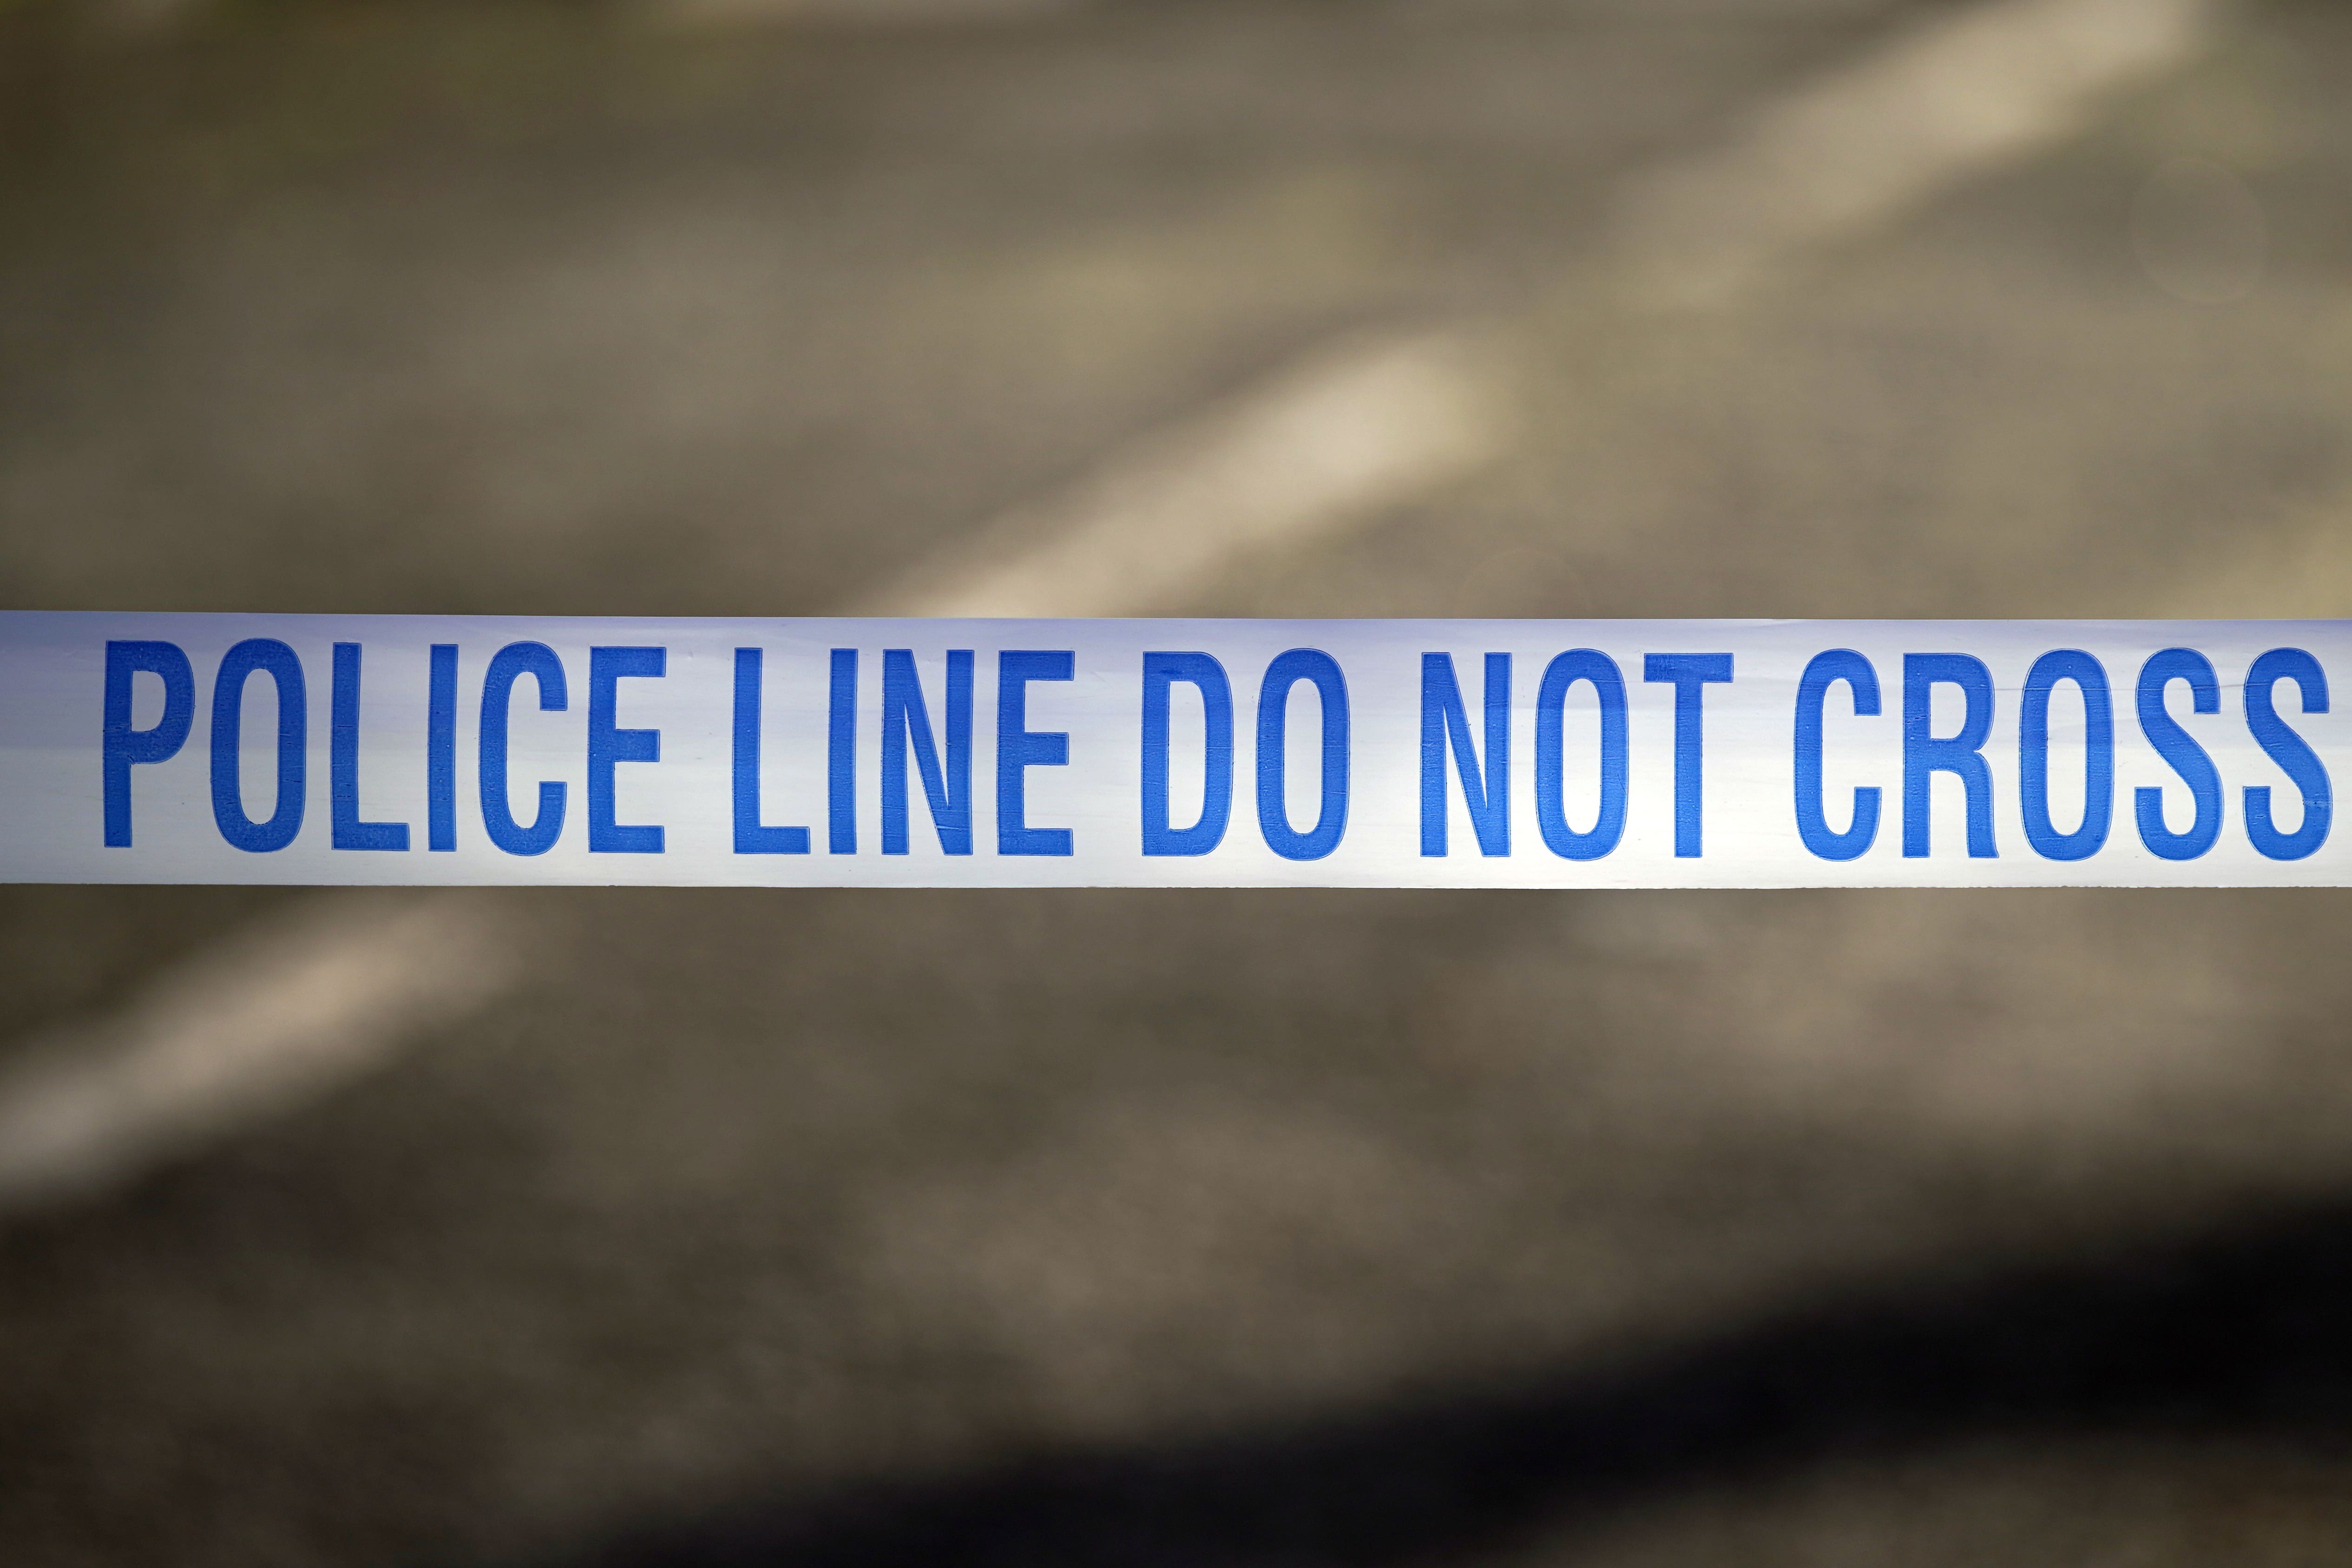 A woman has died after she was attacked in broad daylight on Saturday morning in Milton Keynes.